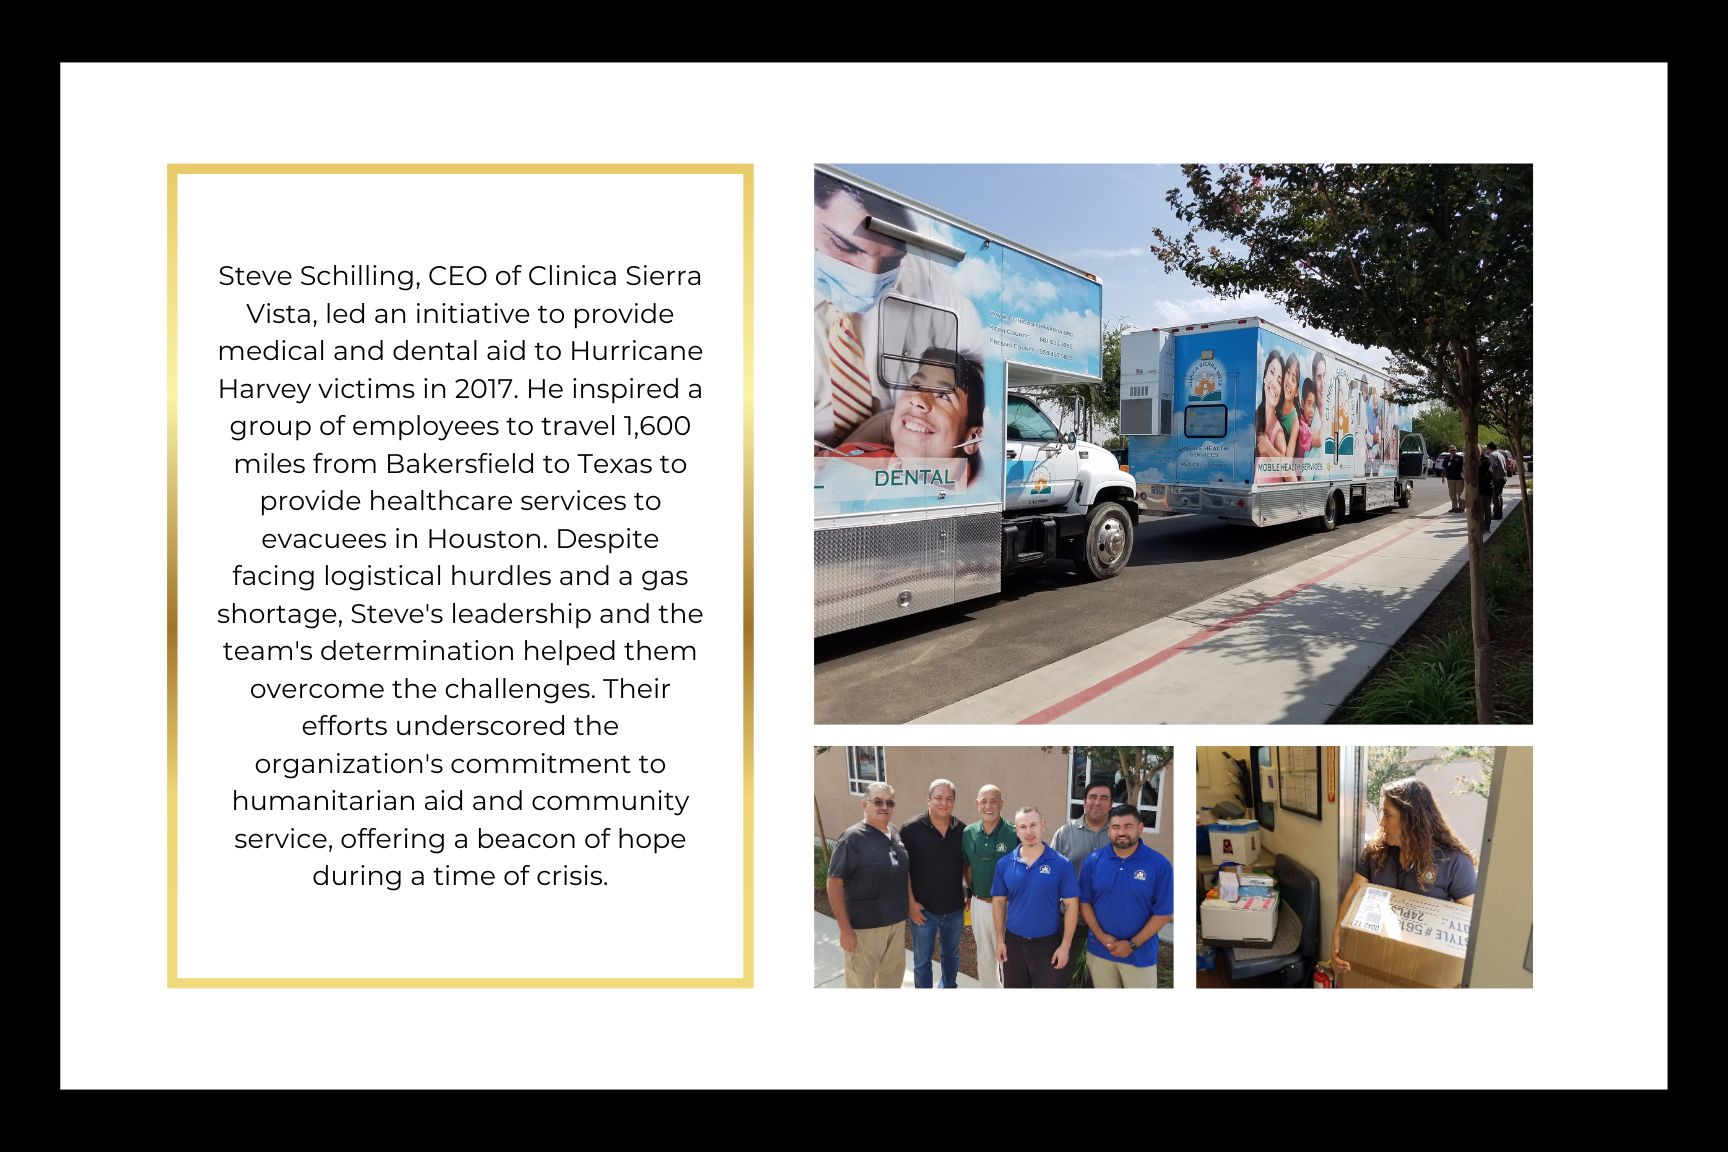 Steve Schilling, CEO of Clinica Sierra Vista, led an initiative to provide medical and dental aid to Hurricane Harvey victims in 2017. He inspired a group of employees to travel 1,600 miles from Bakersfield to Texas to provide healthcare services to evacuees in Houston. Despite facing logistical hurdles and a gas shortage, Steve's leadership and the team's determination helped them overcome the challenges. Their efforts underscored the organization's commitment to humanitarian aid and community service, offering a beacon of hope during a time of crisis.